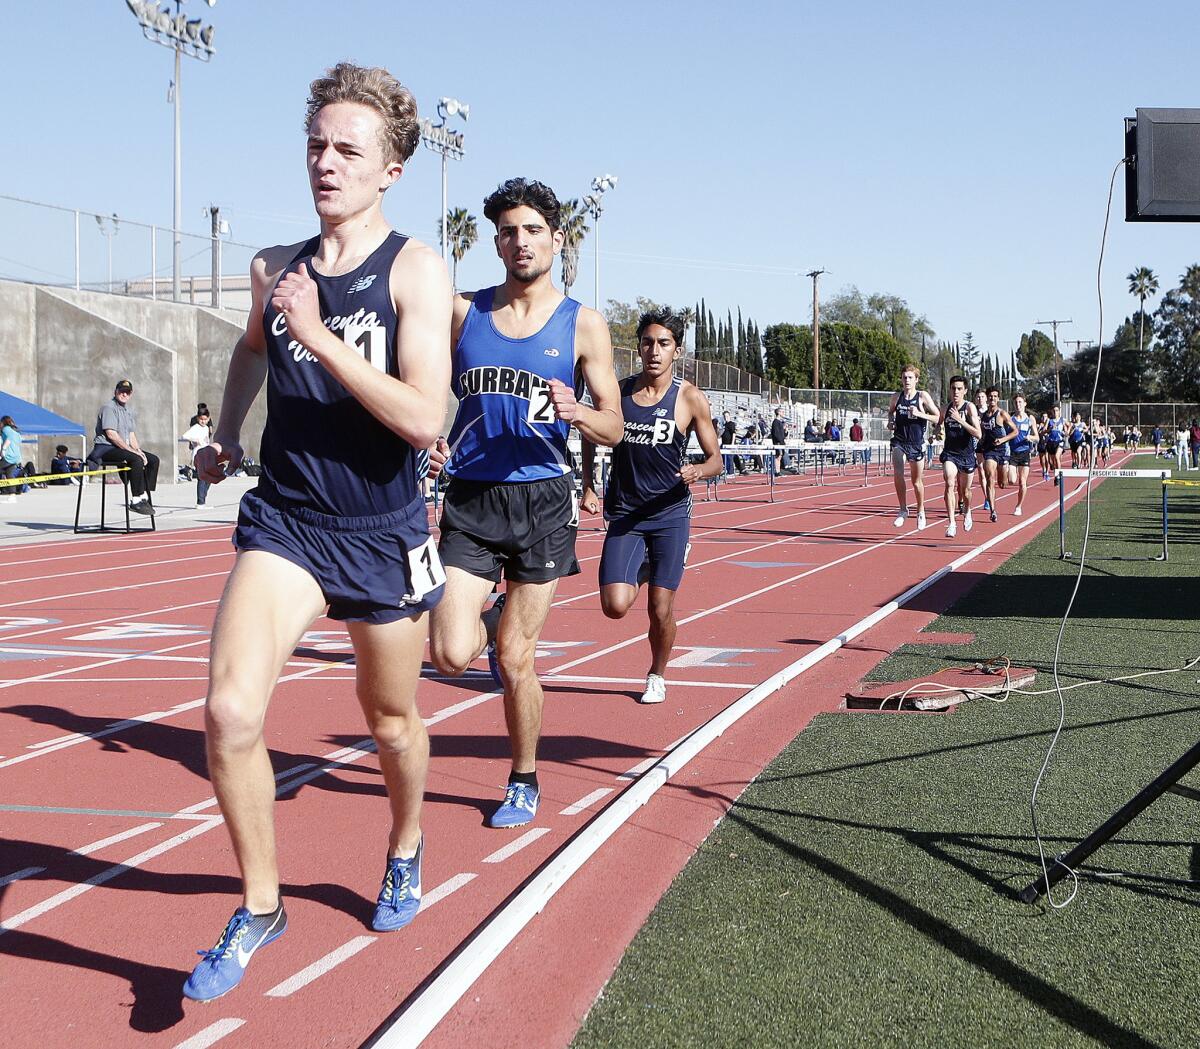 Crescenta Valley High's Dylan Wilbur will be a key returner this season for the boys' track and field team after advancing to the state meet last season.